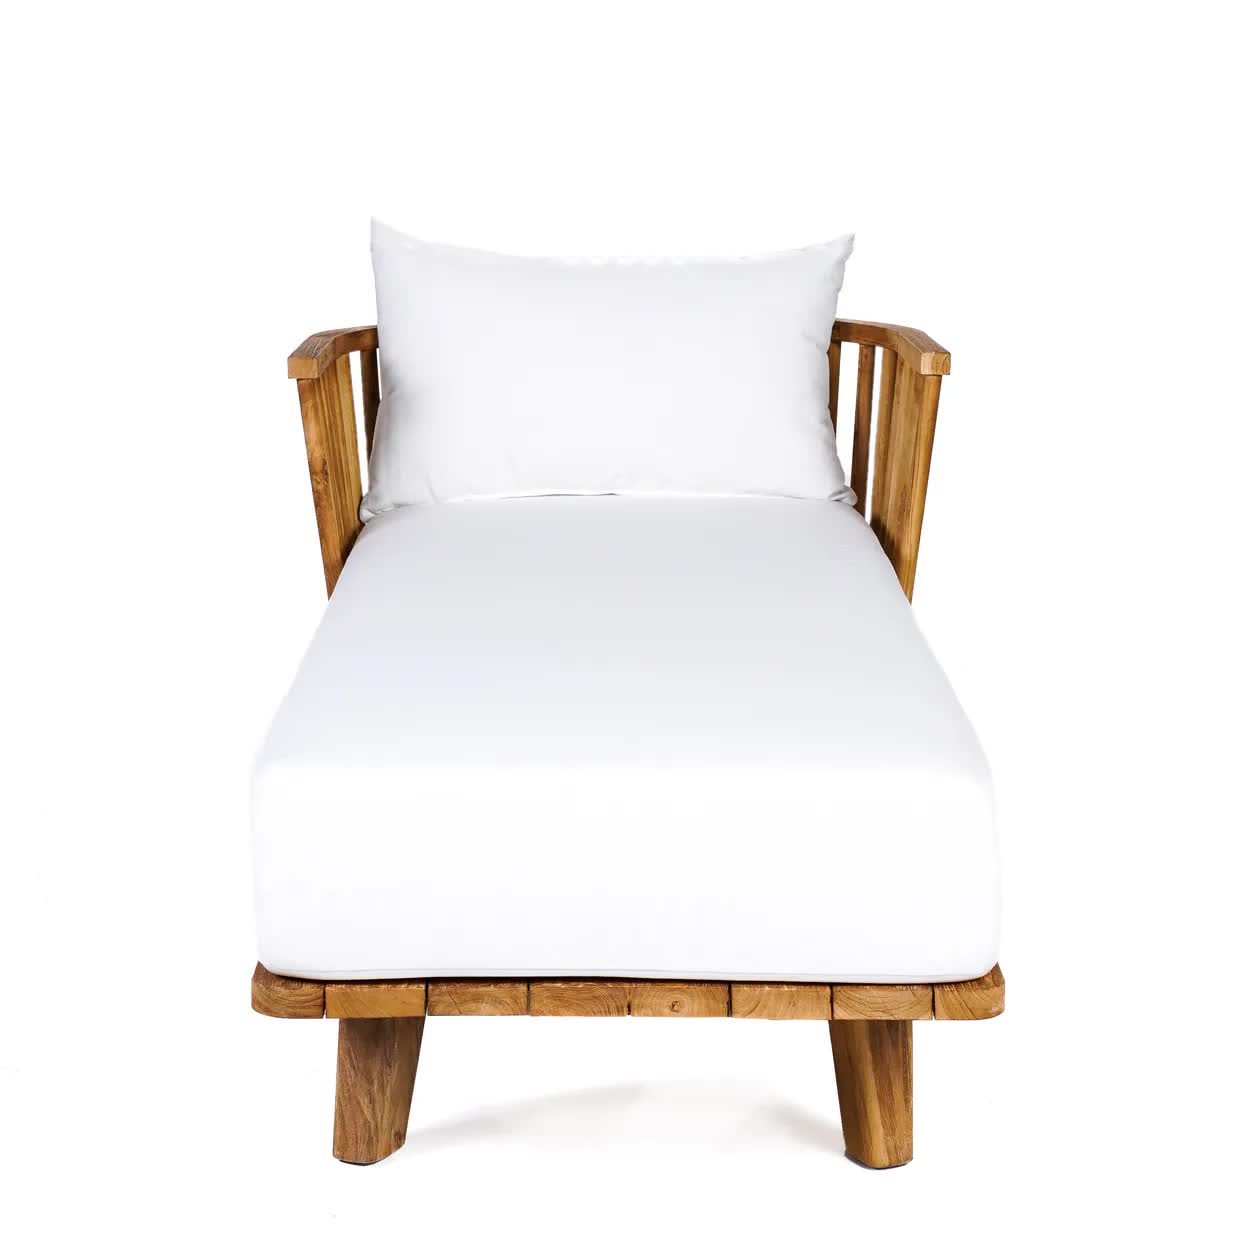 THE MALAWI Daybed Natural White